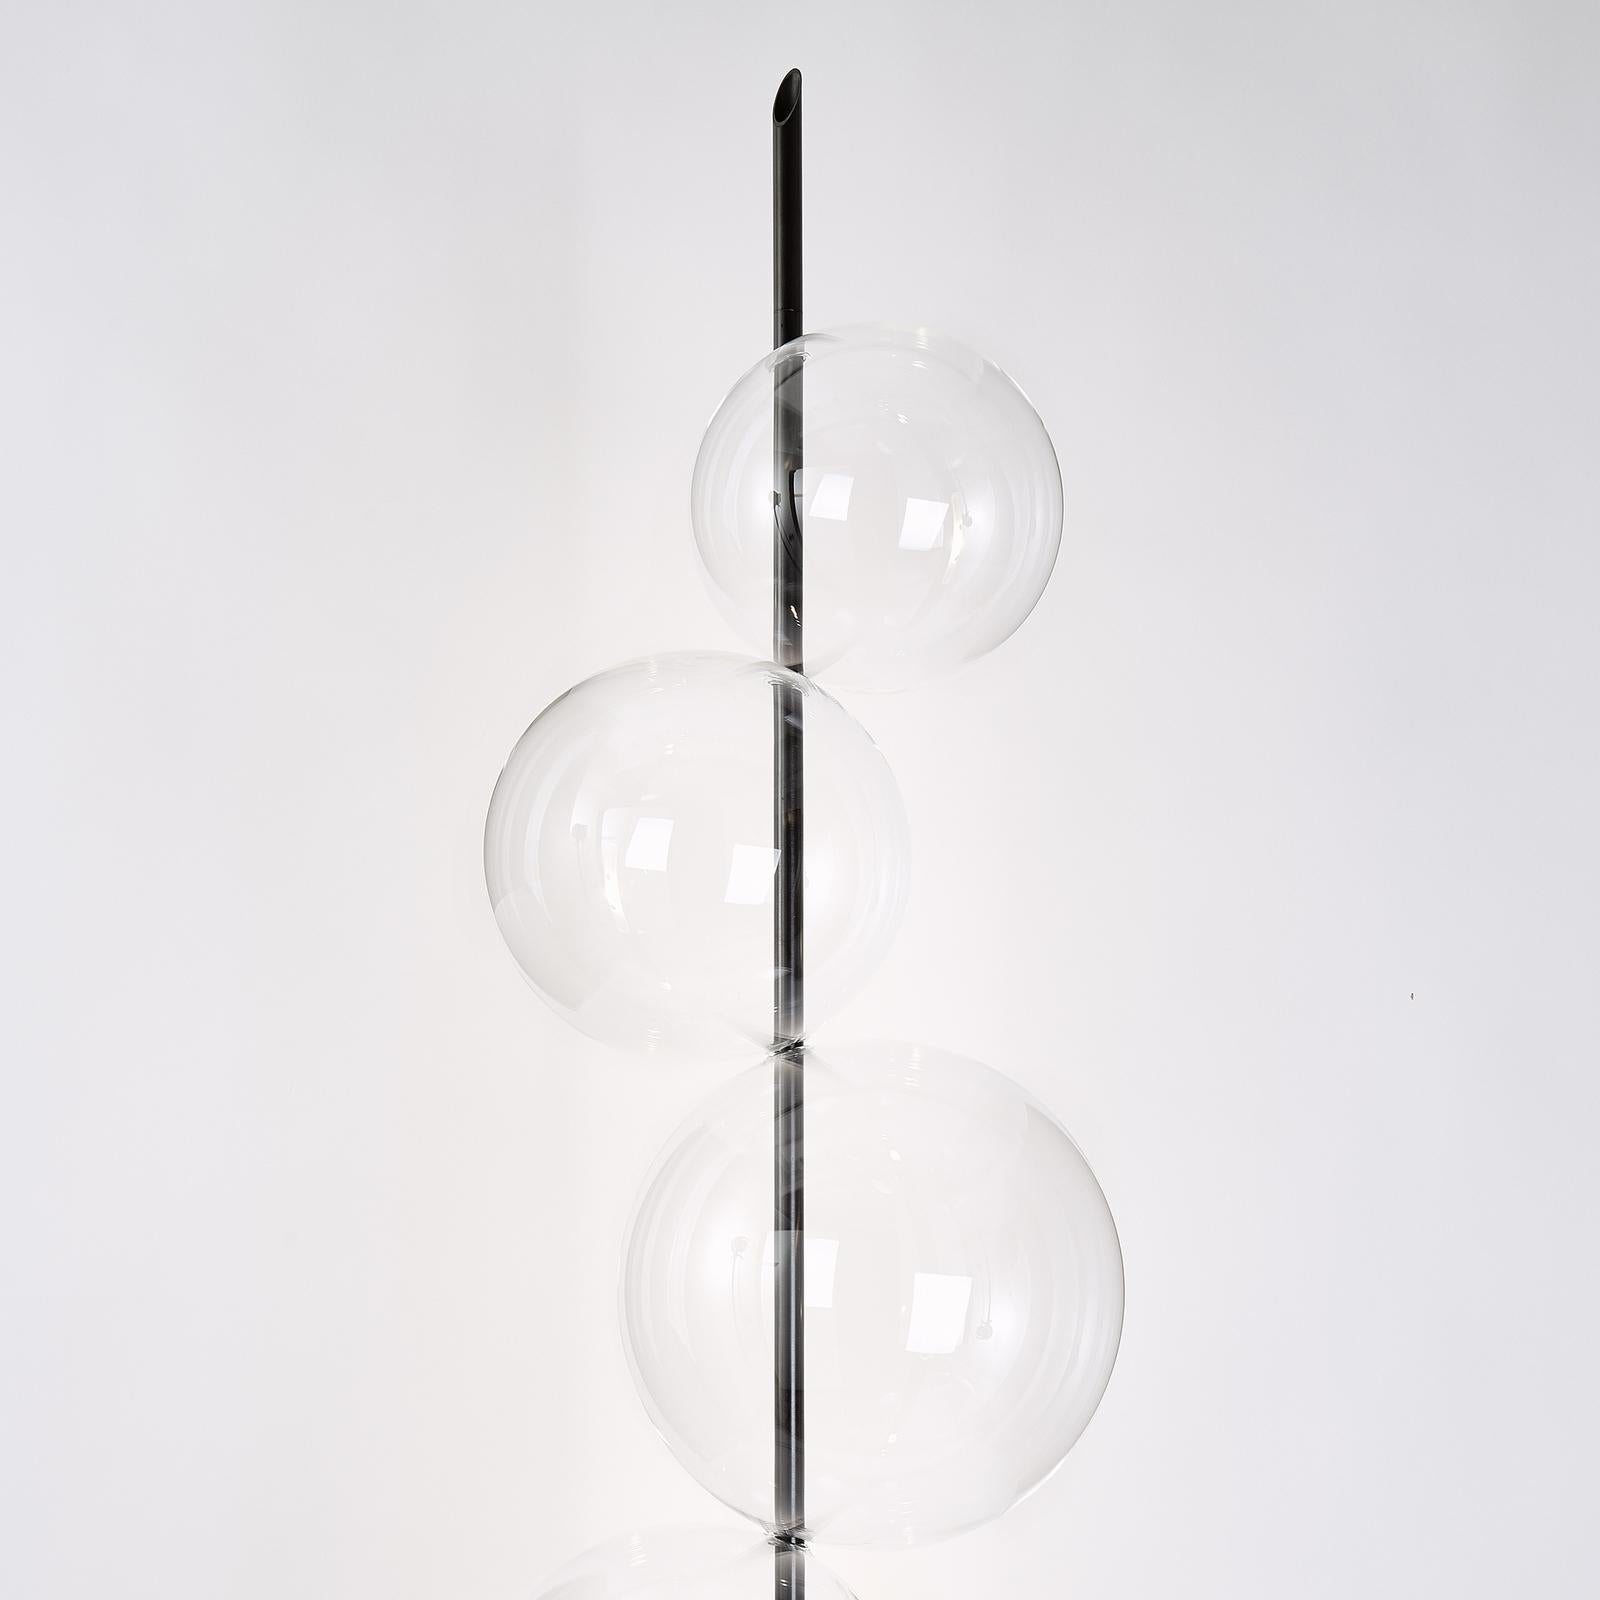 This stunning floor lamp comprises five clear glass spheres of different sizes assembled on a cylindrical pole and base in burnished brass, to form an abstract organic Silhouette reminiscent of soap bubble clusters. Crafted in the traditional hand